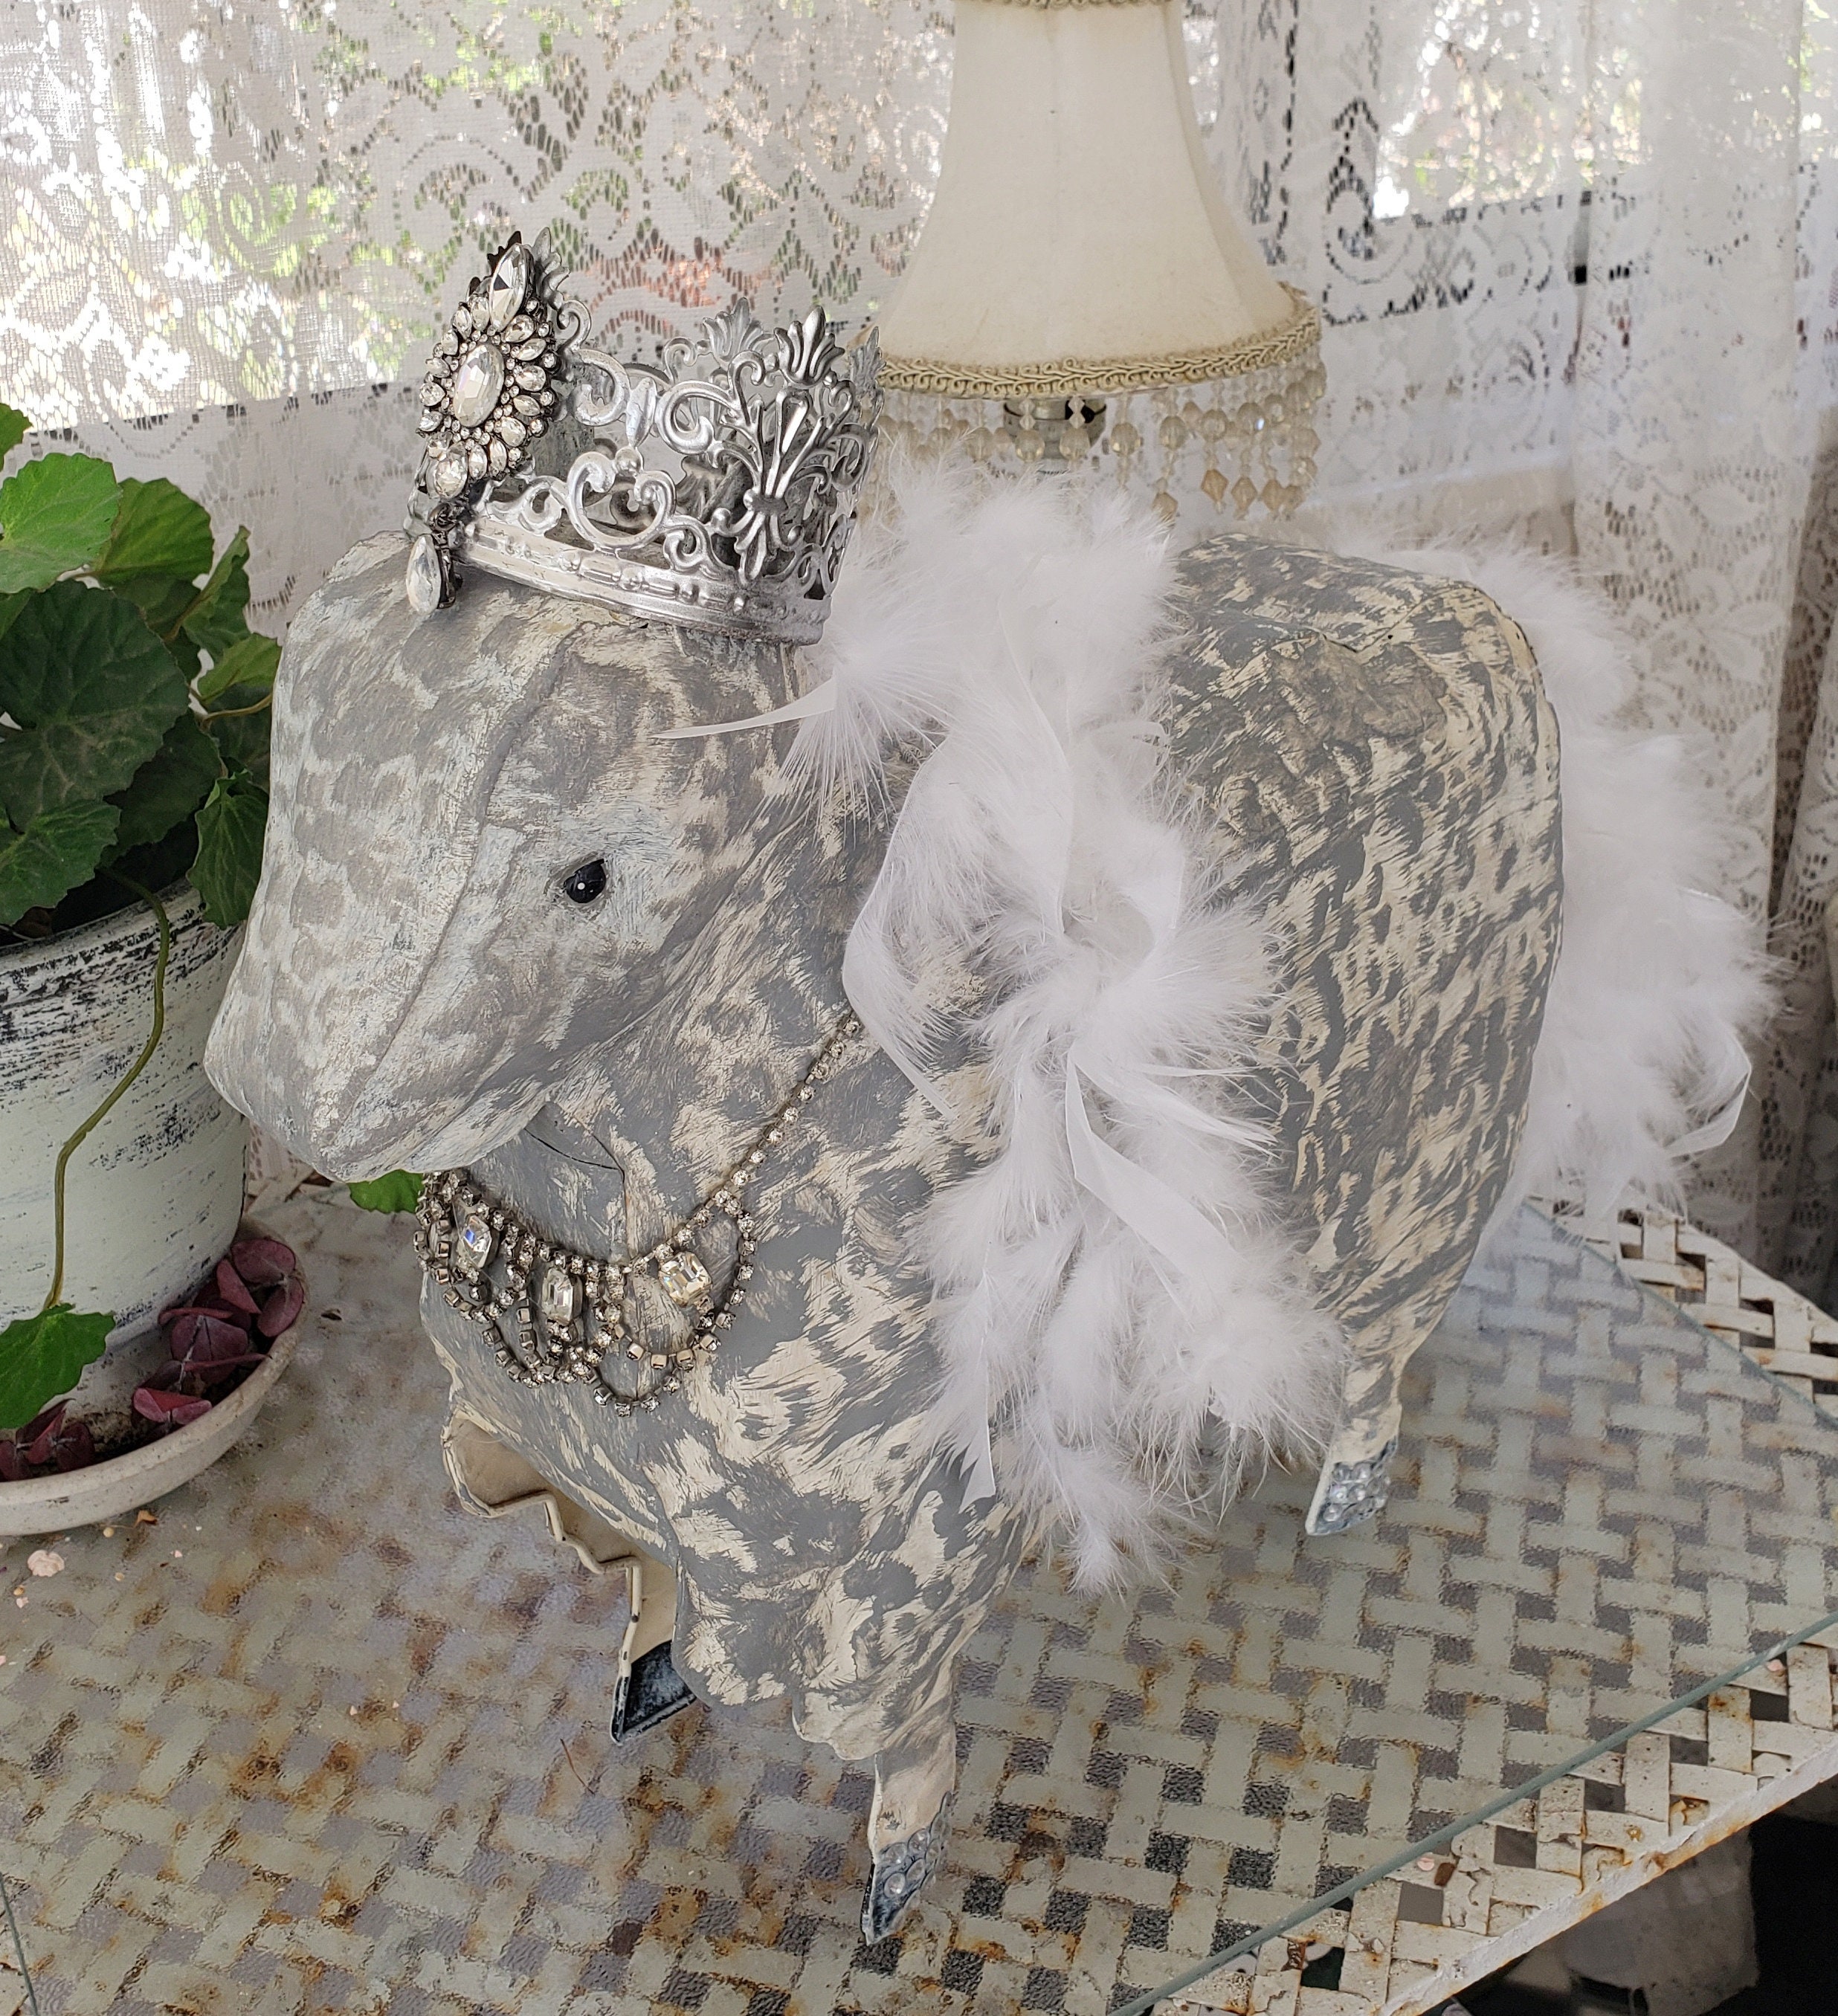 Ram Statue Decor Embellished Rhinestones Crown Feather Boa Sculpture Cottage Chic Ooak